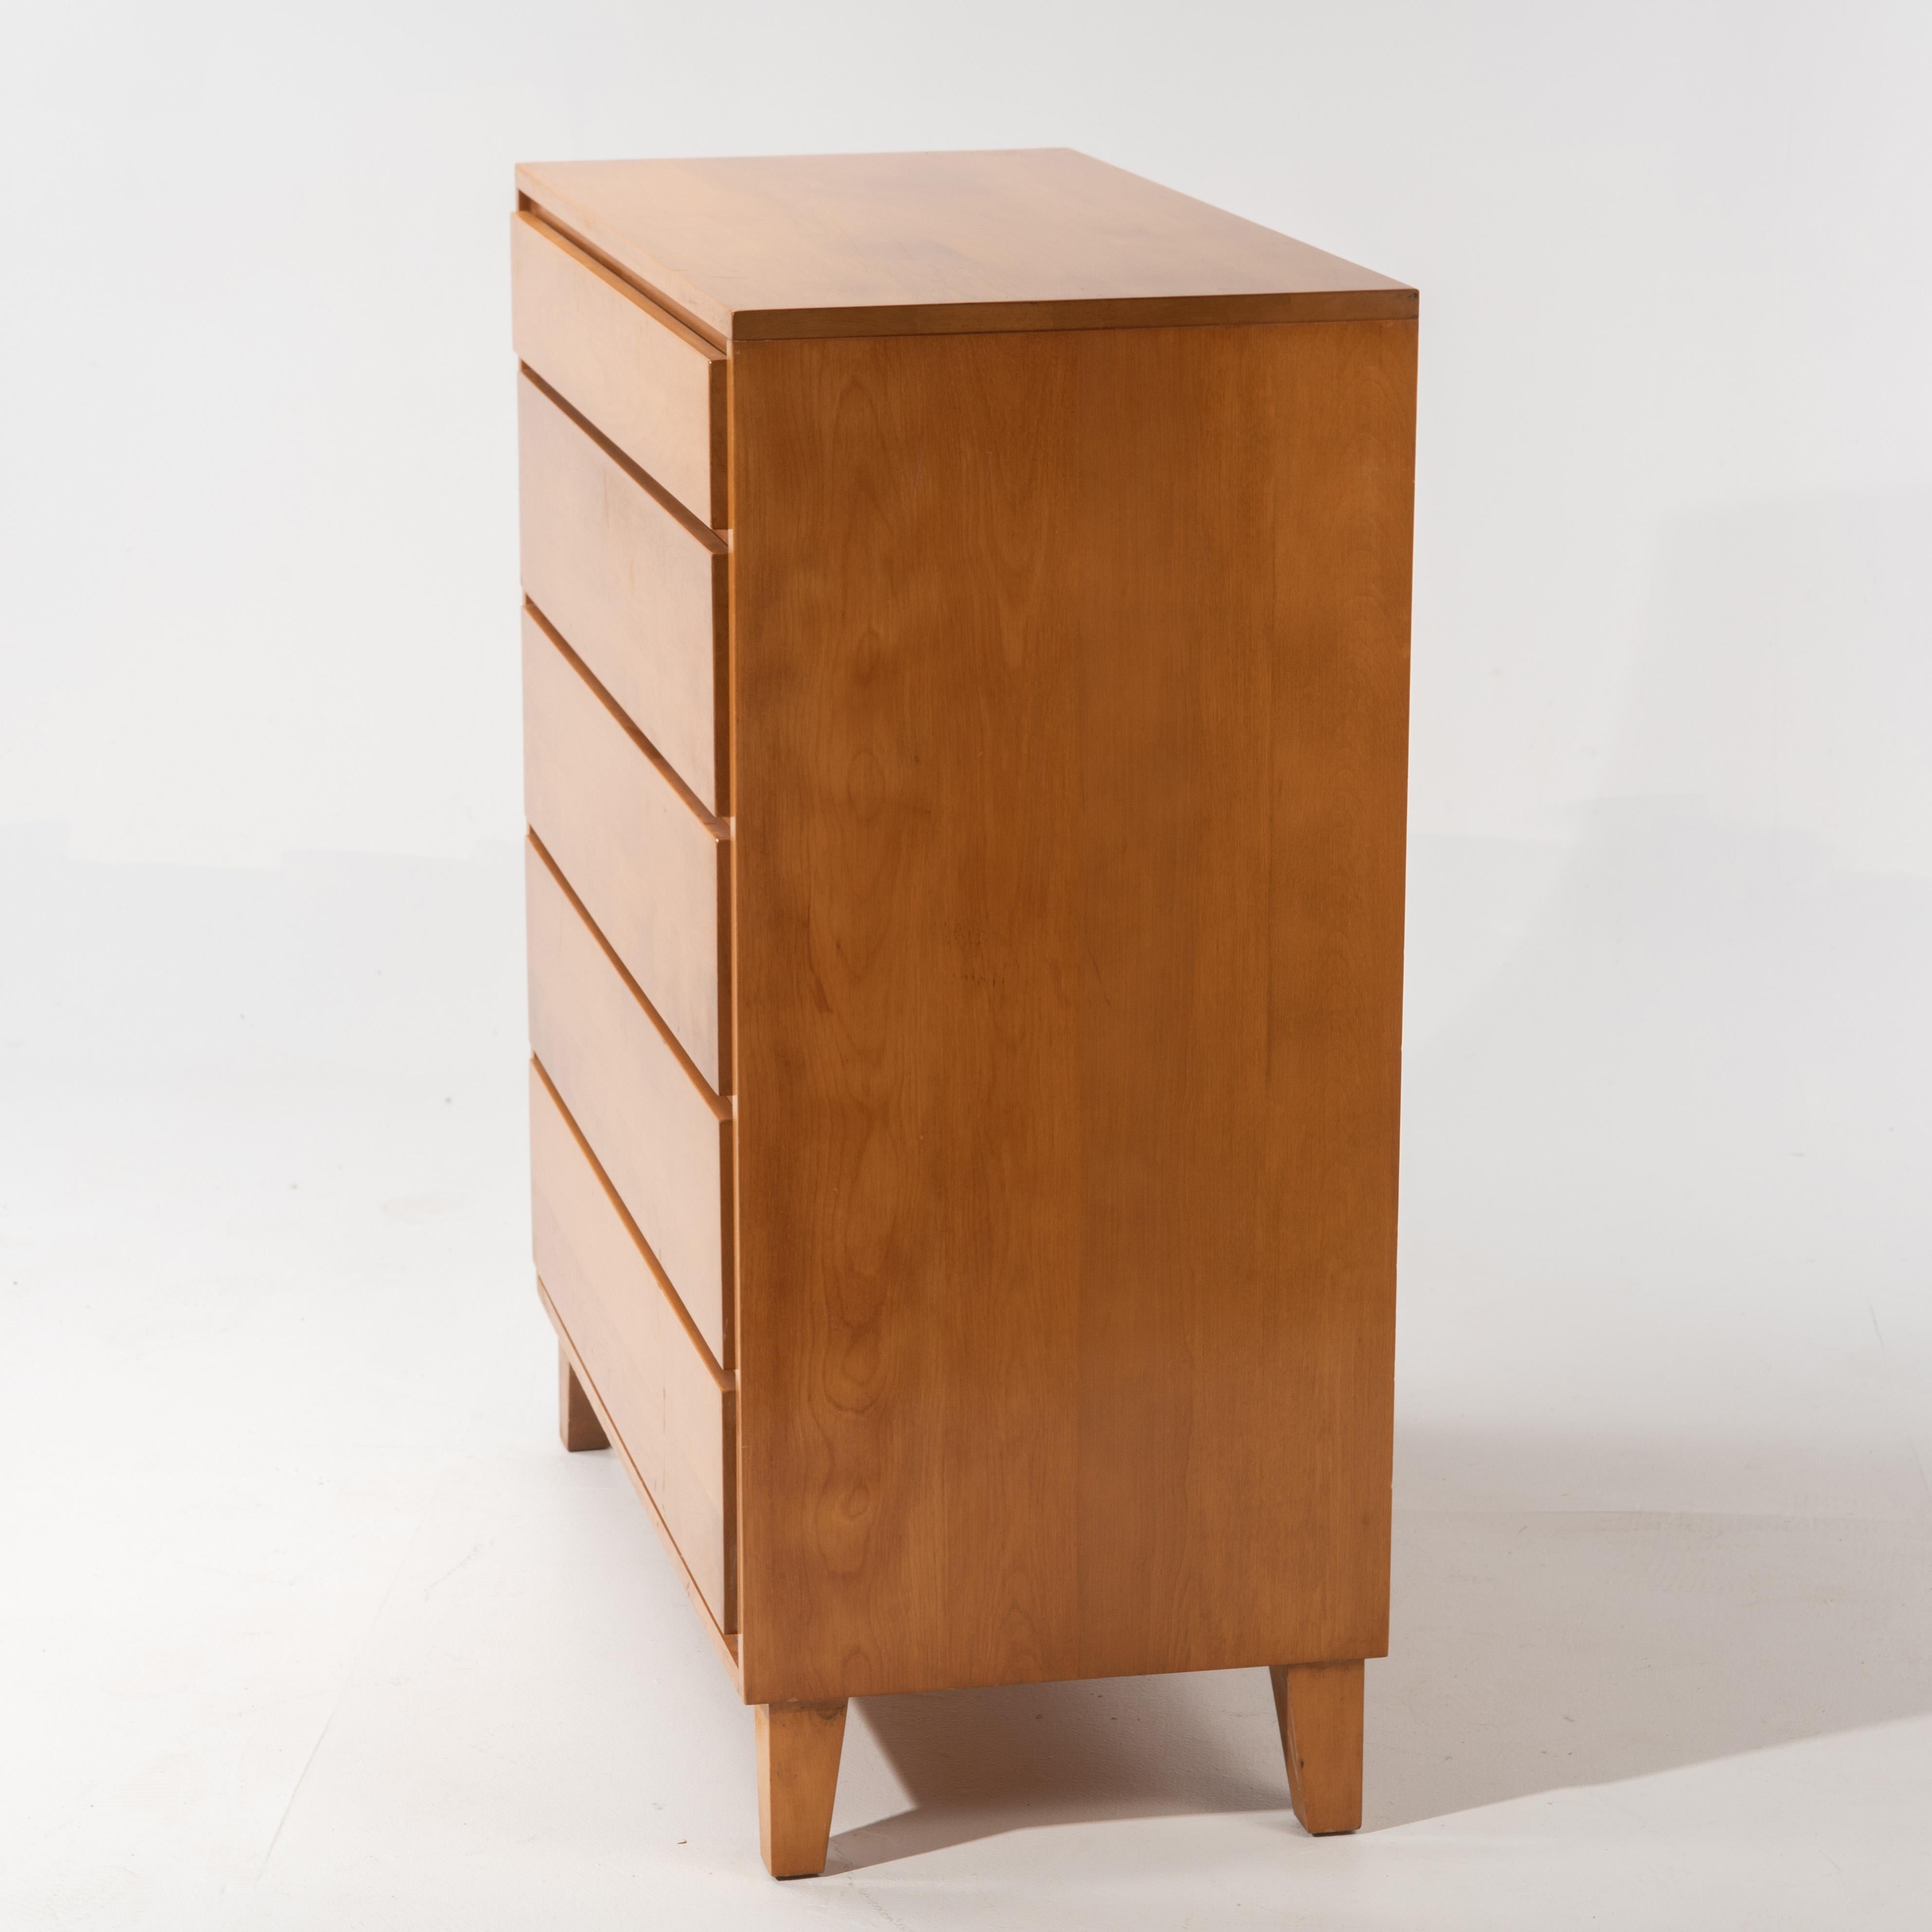 Leslie Diamond for Conant Ball Modernmates collection birch dresser, this well proportioned piece comprises a five-drawer case set on splayed feet.